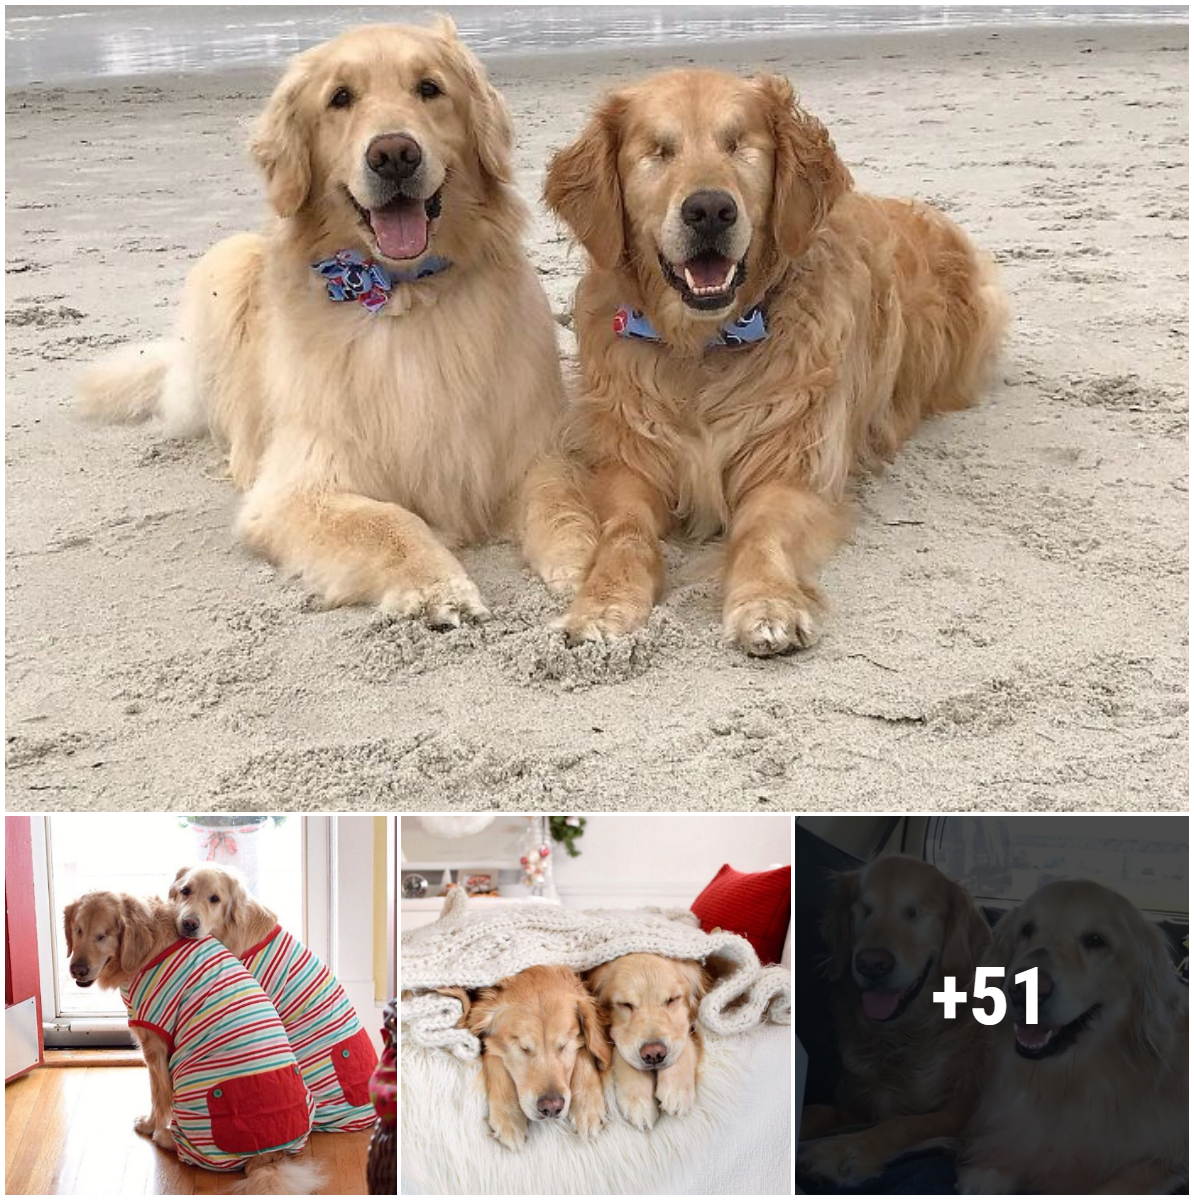 Many people were touched by the touching relationship between a blind golden retriever and his best friend, his guide dog.